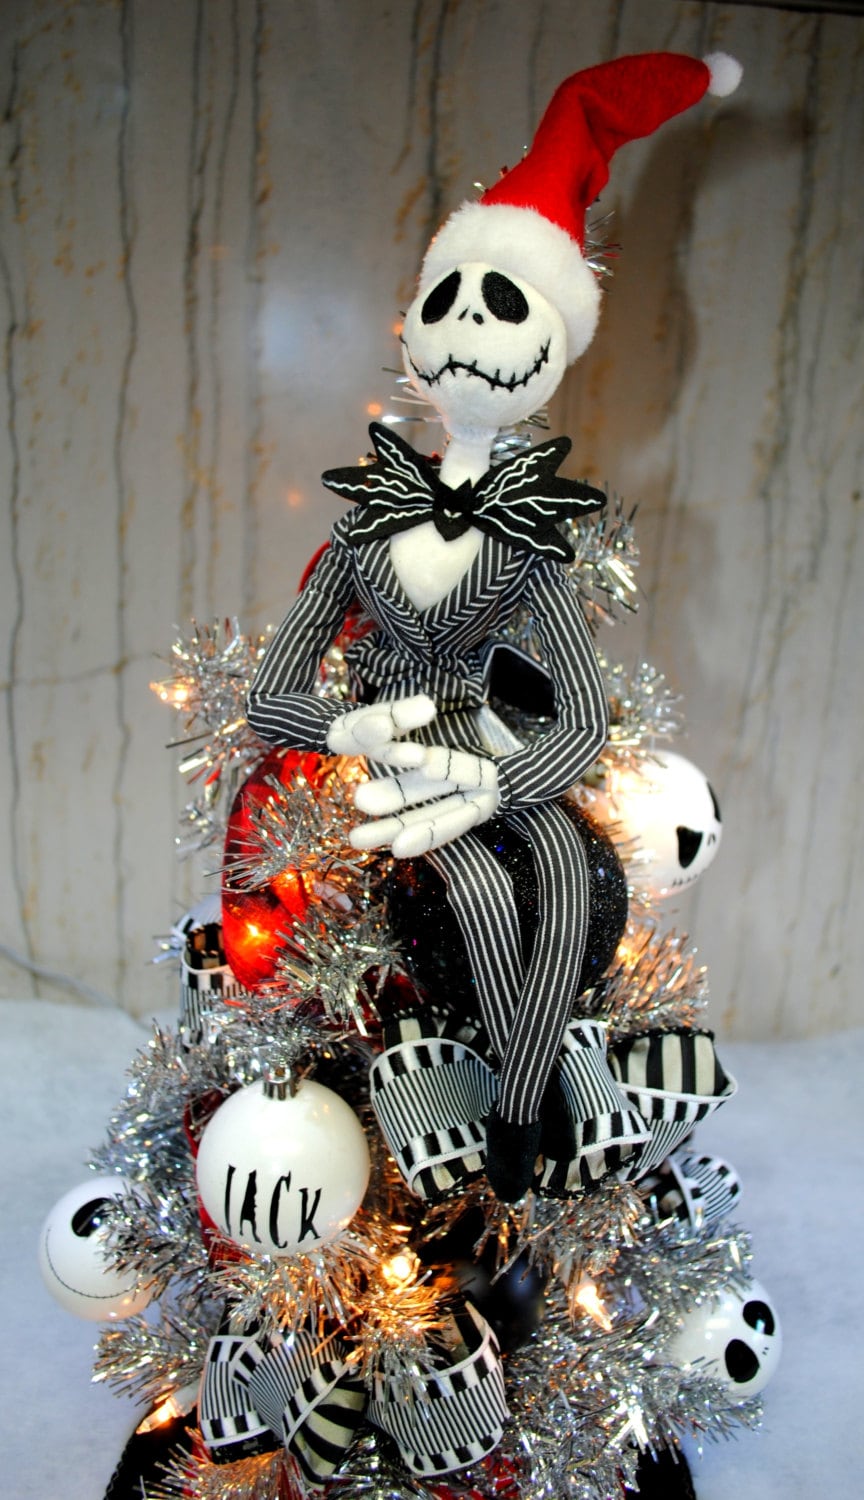 Easy to Put Soft Jinsshop The Nightmare Before Christmas Jack and Sally Christmas Tree Skirt Party Decoration 30 Light for Christmas Decorations Holiday